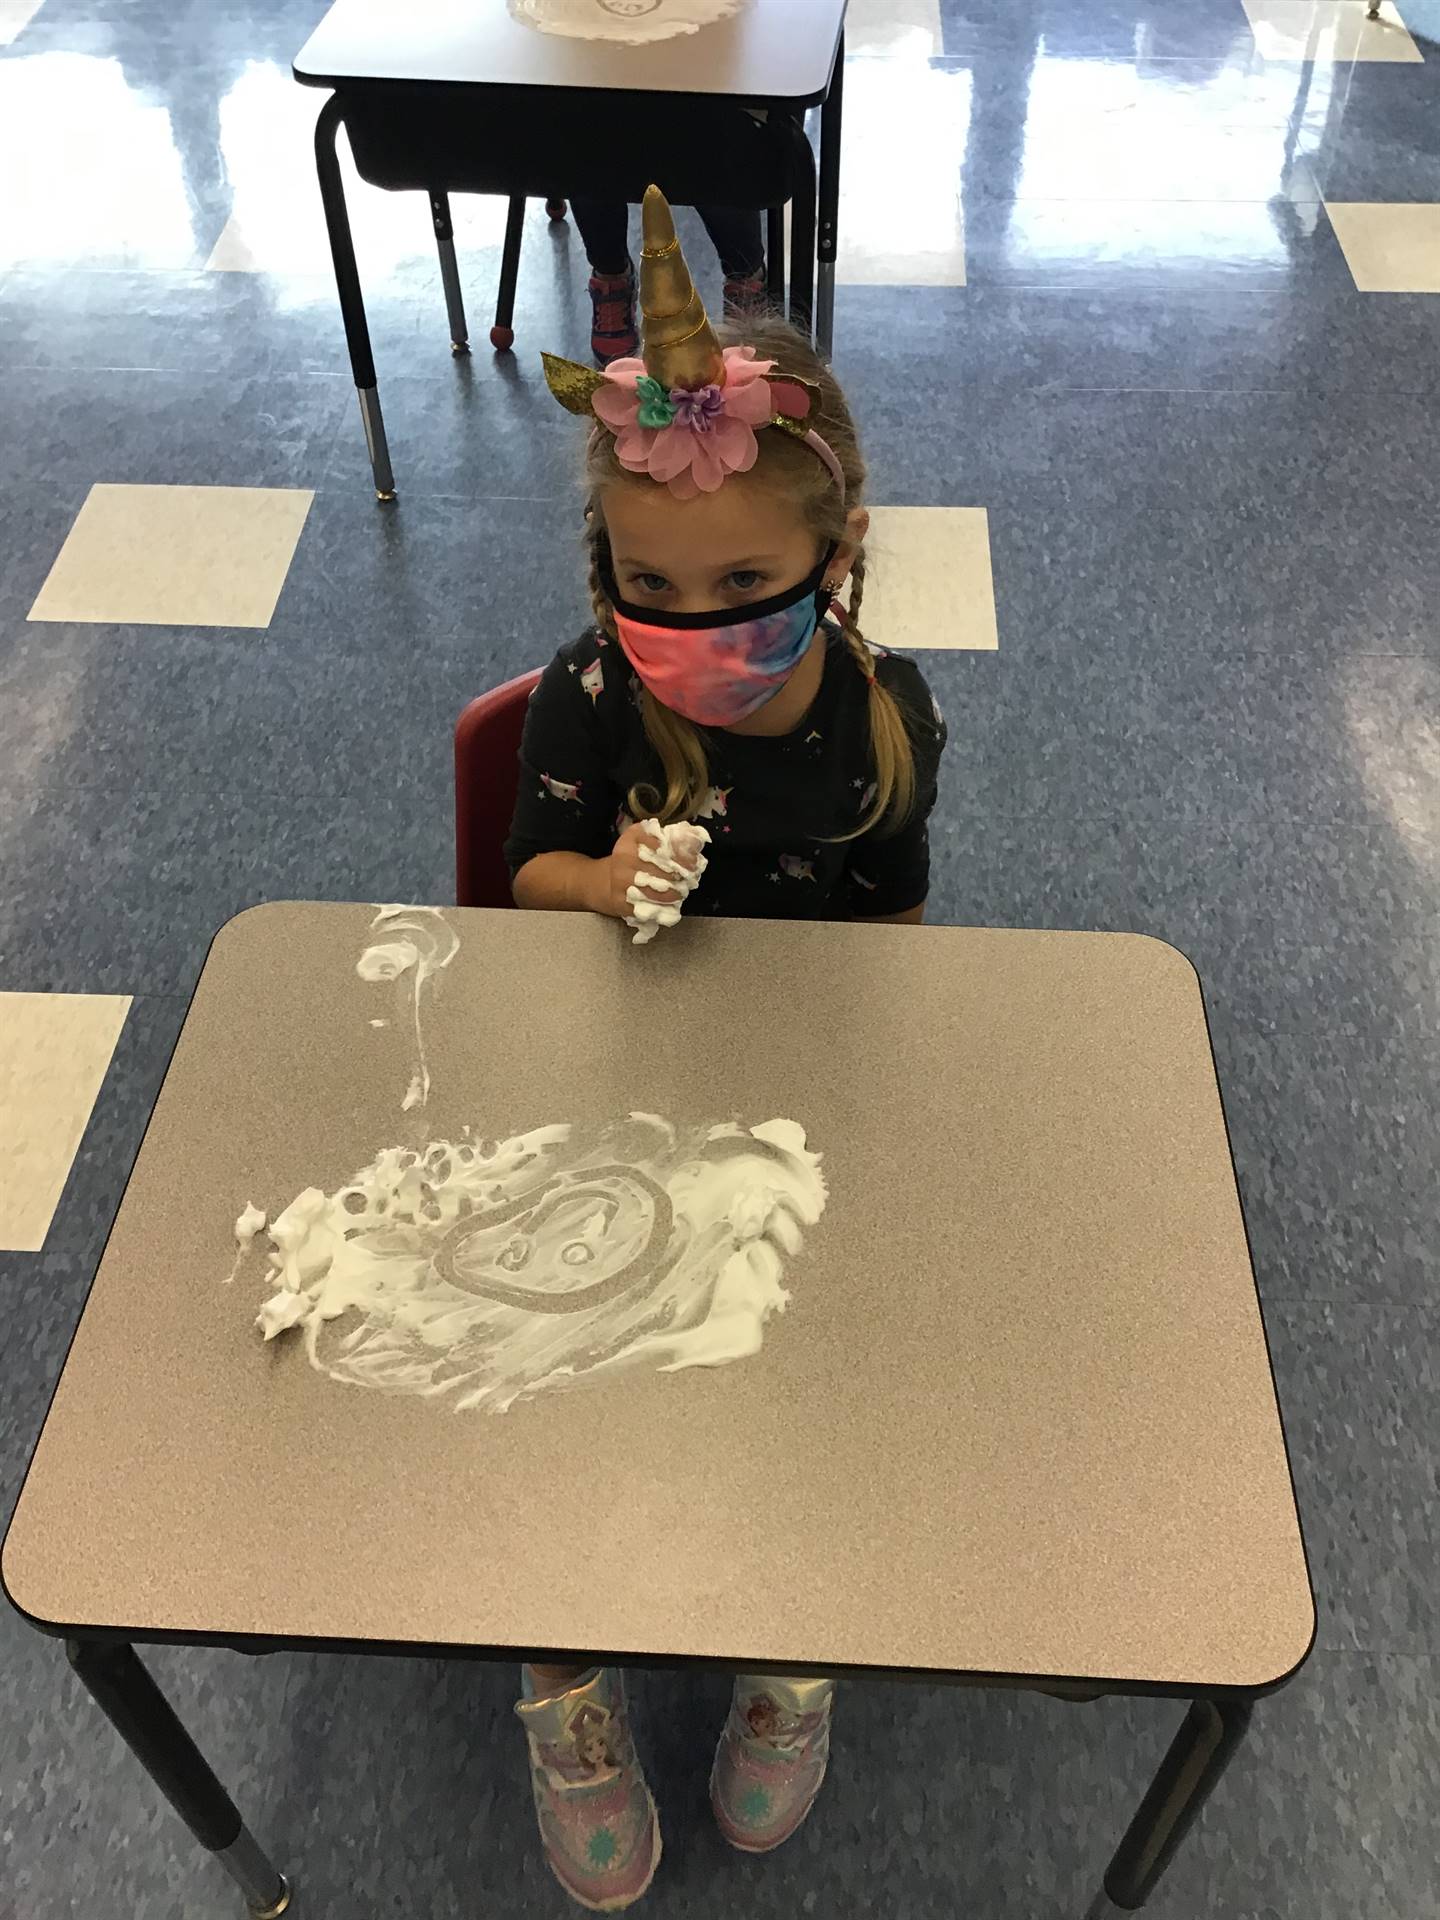 student draws an emotions in  shaving cream!